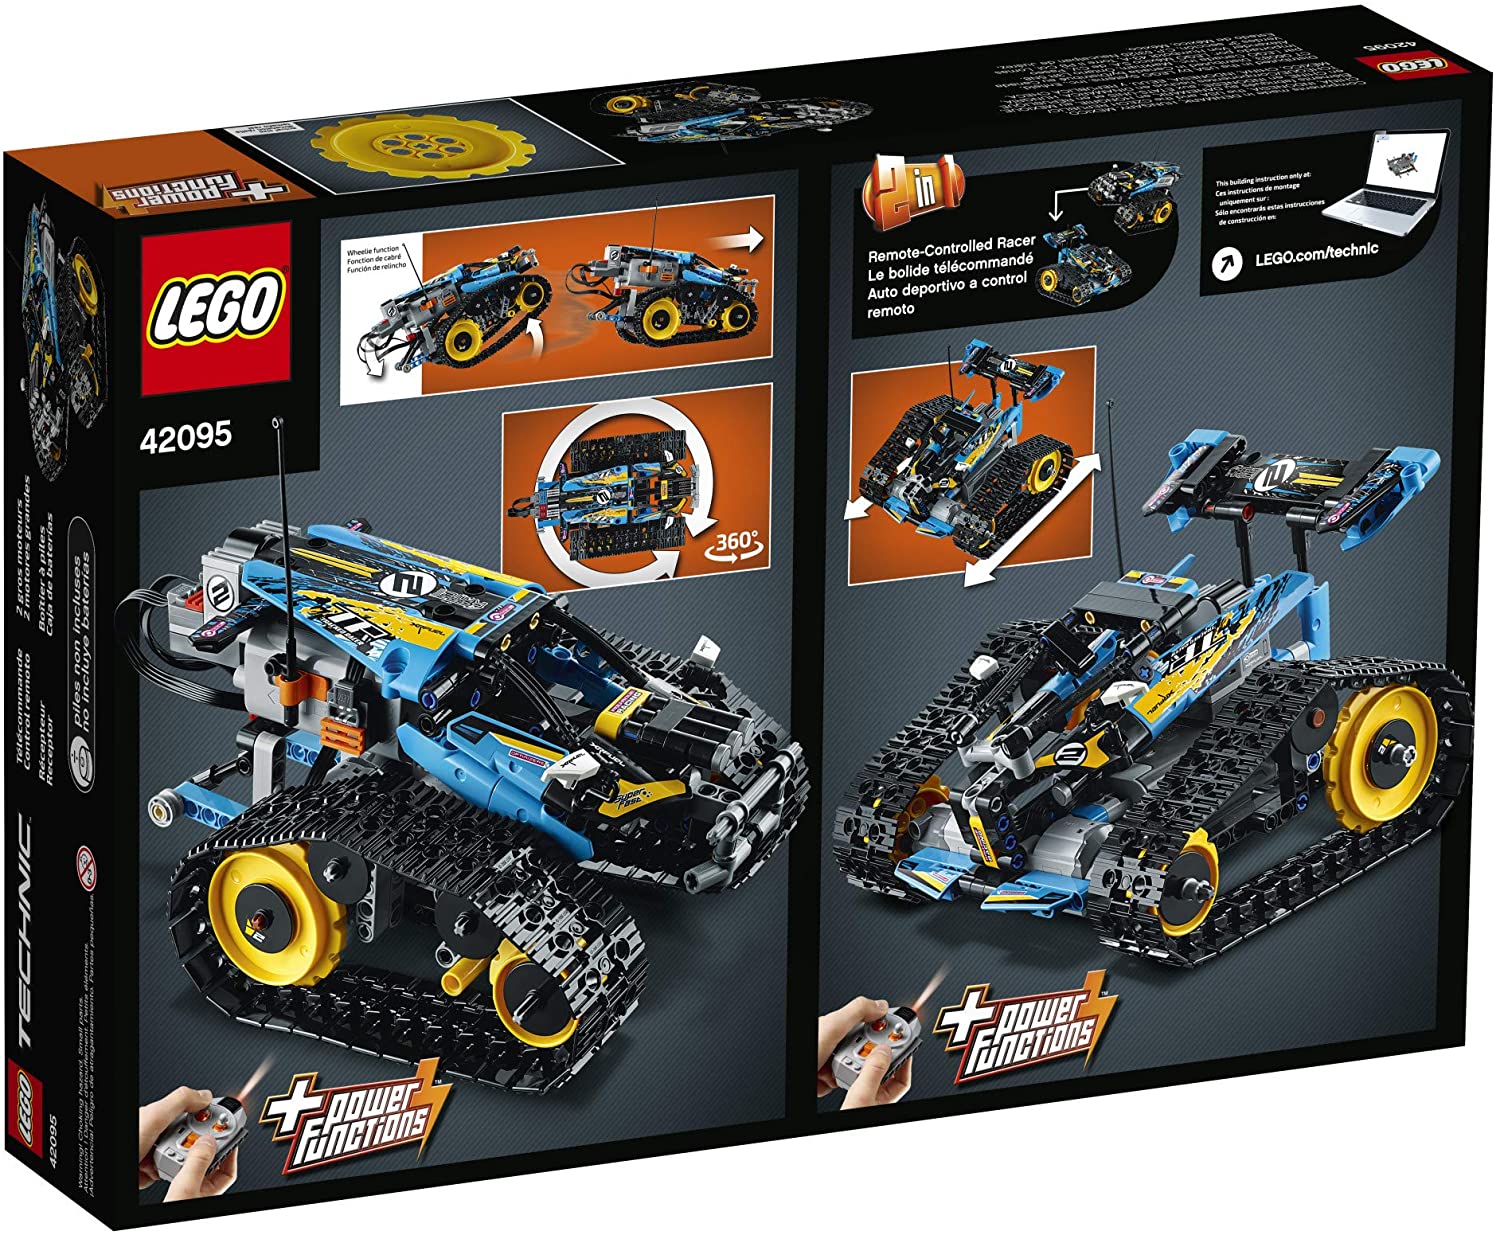 Lego Technic Remote Controlled Stunt Racer Building Kit, 324 Pieces, -- ANB Baby